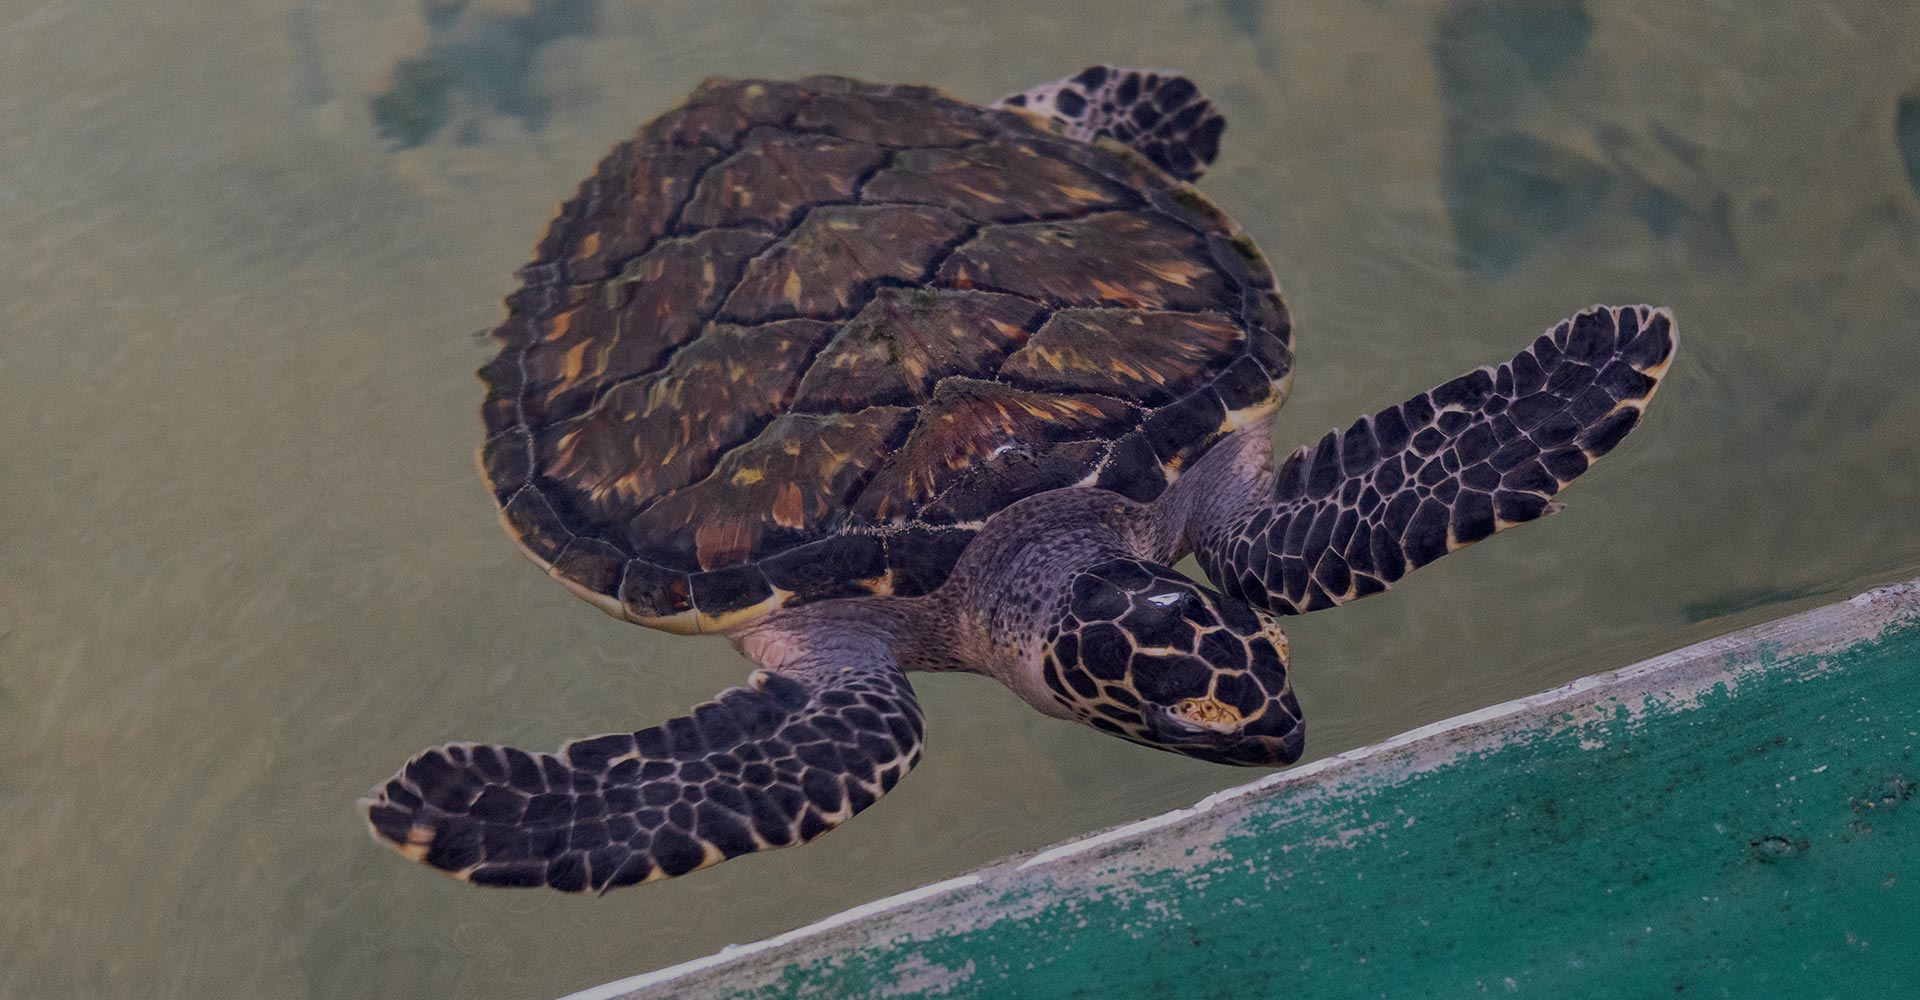 A fully grown Sea turtle in the turtle hatchery